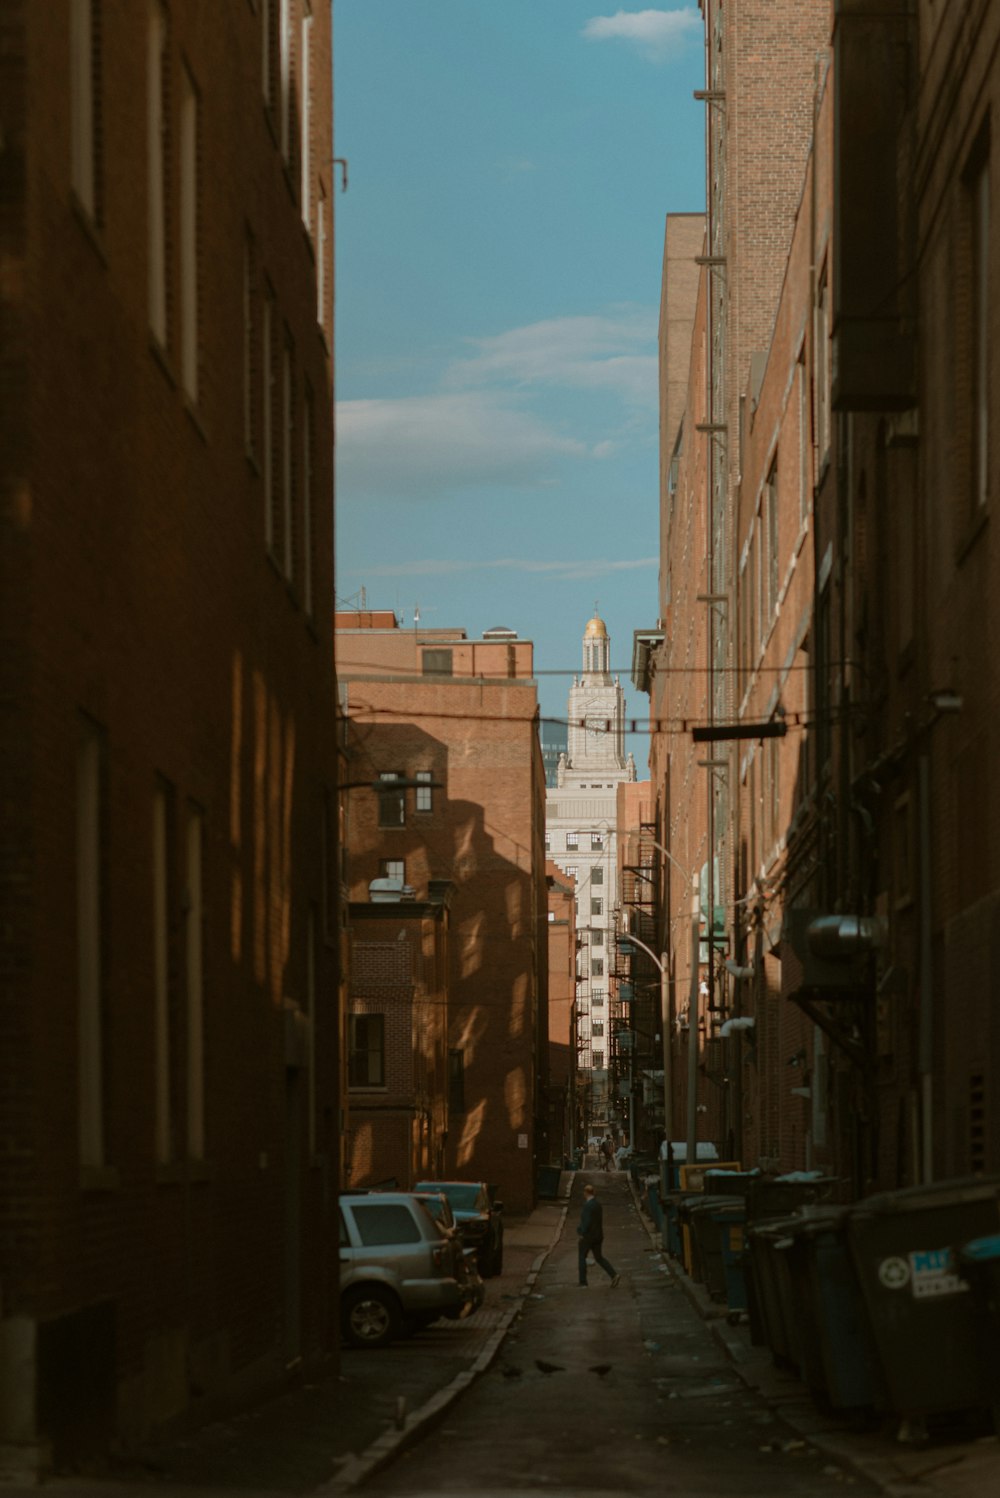 a person walking down a narrow street in a city